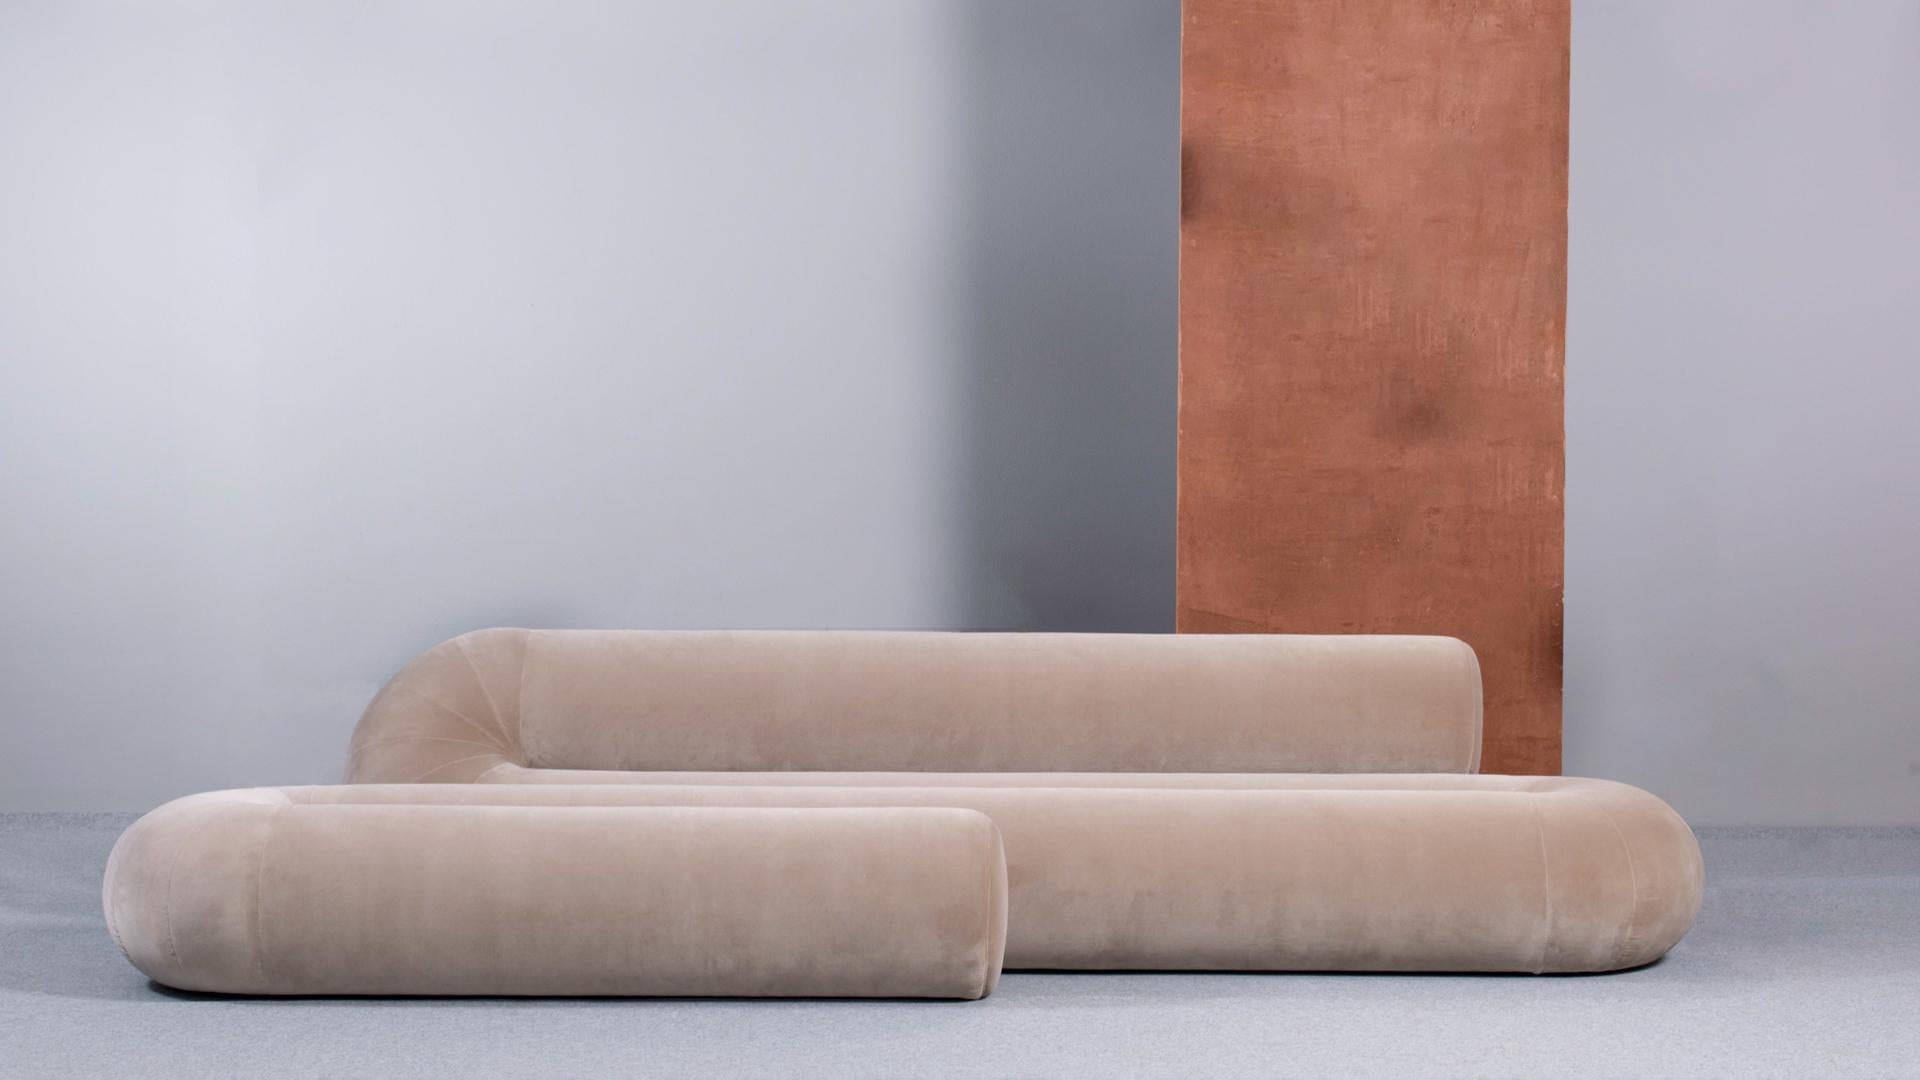 Serpentine takes the challenge of rethinking a modern sofa by incorporating different seating solutions in one fluid object. The alternation of back and leg support mimics the functionality of a classic seat, a pouf, and a chaise longue. Serpentine